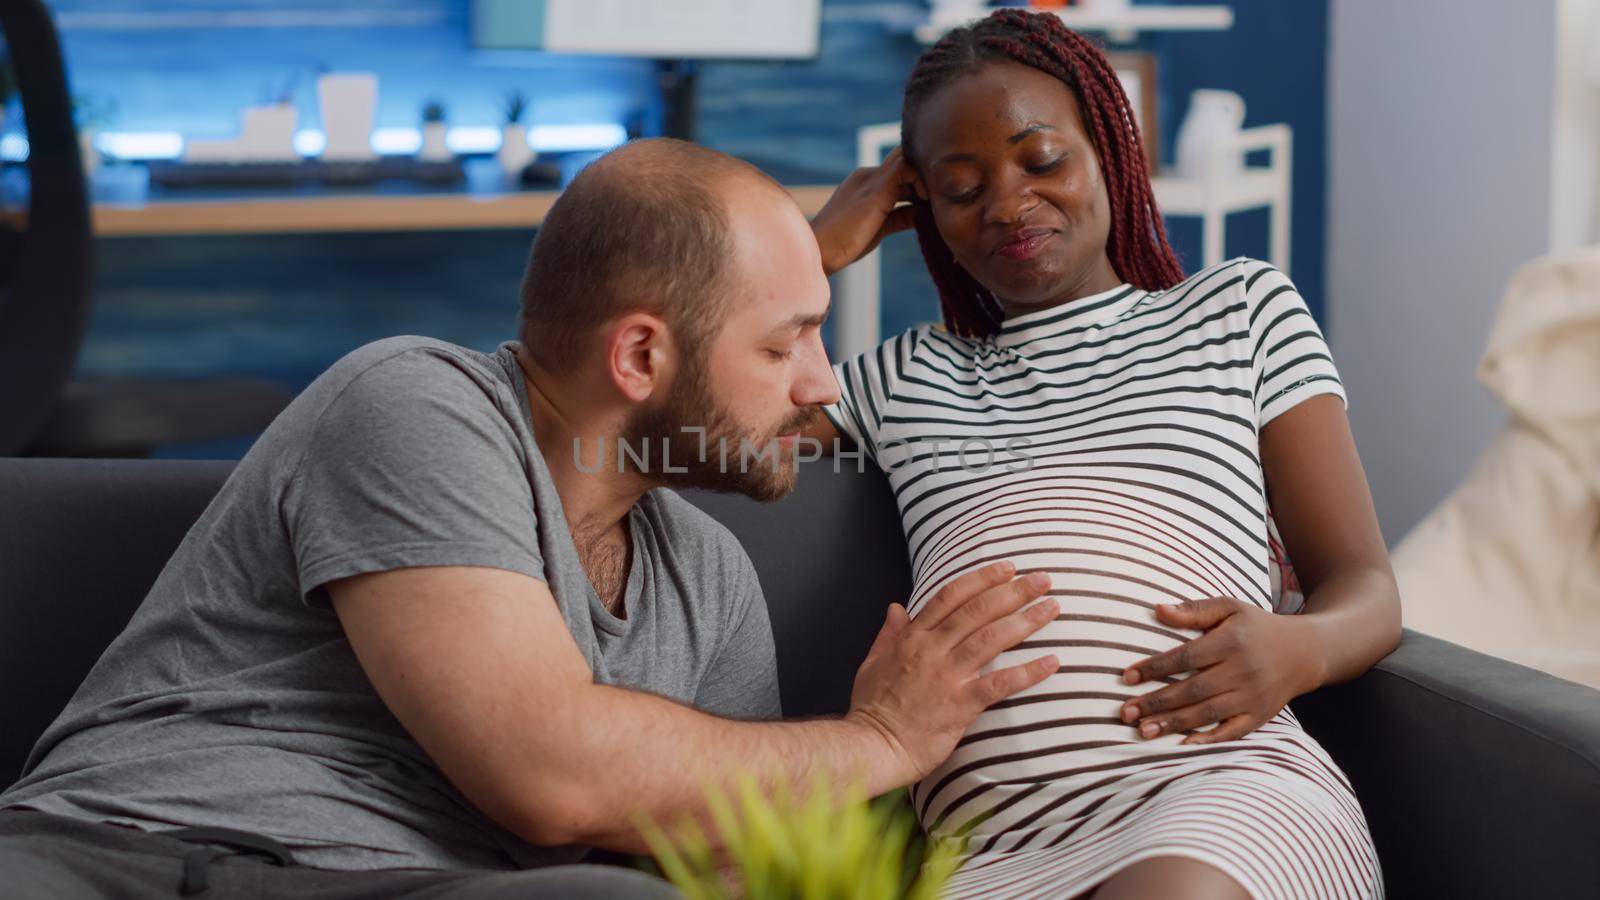 Married interracial couple expecting child bonding at home by DCStudio